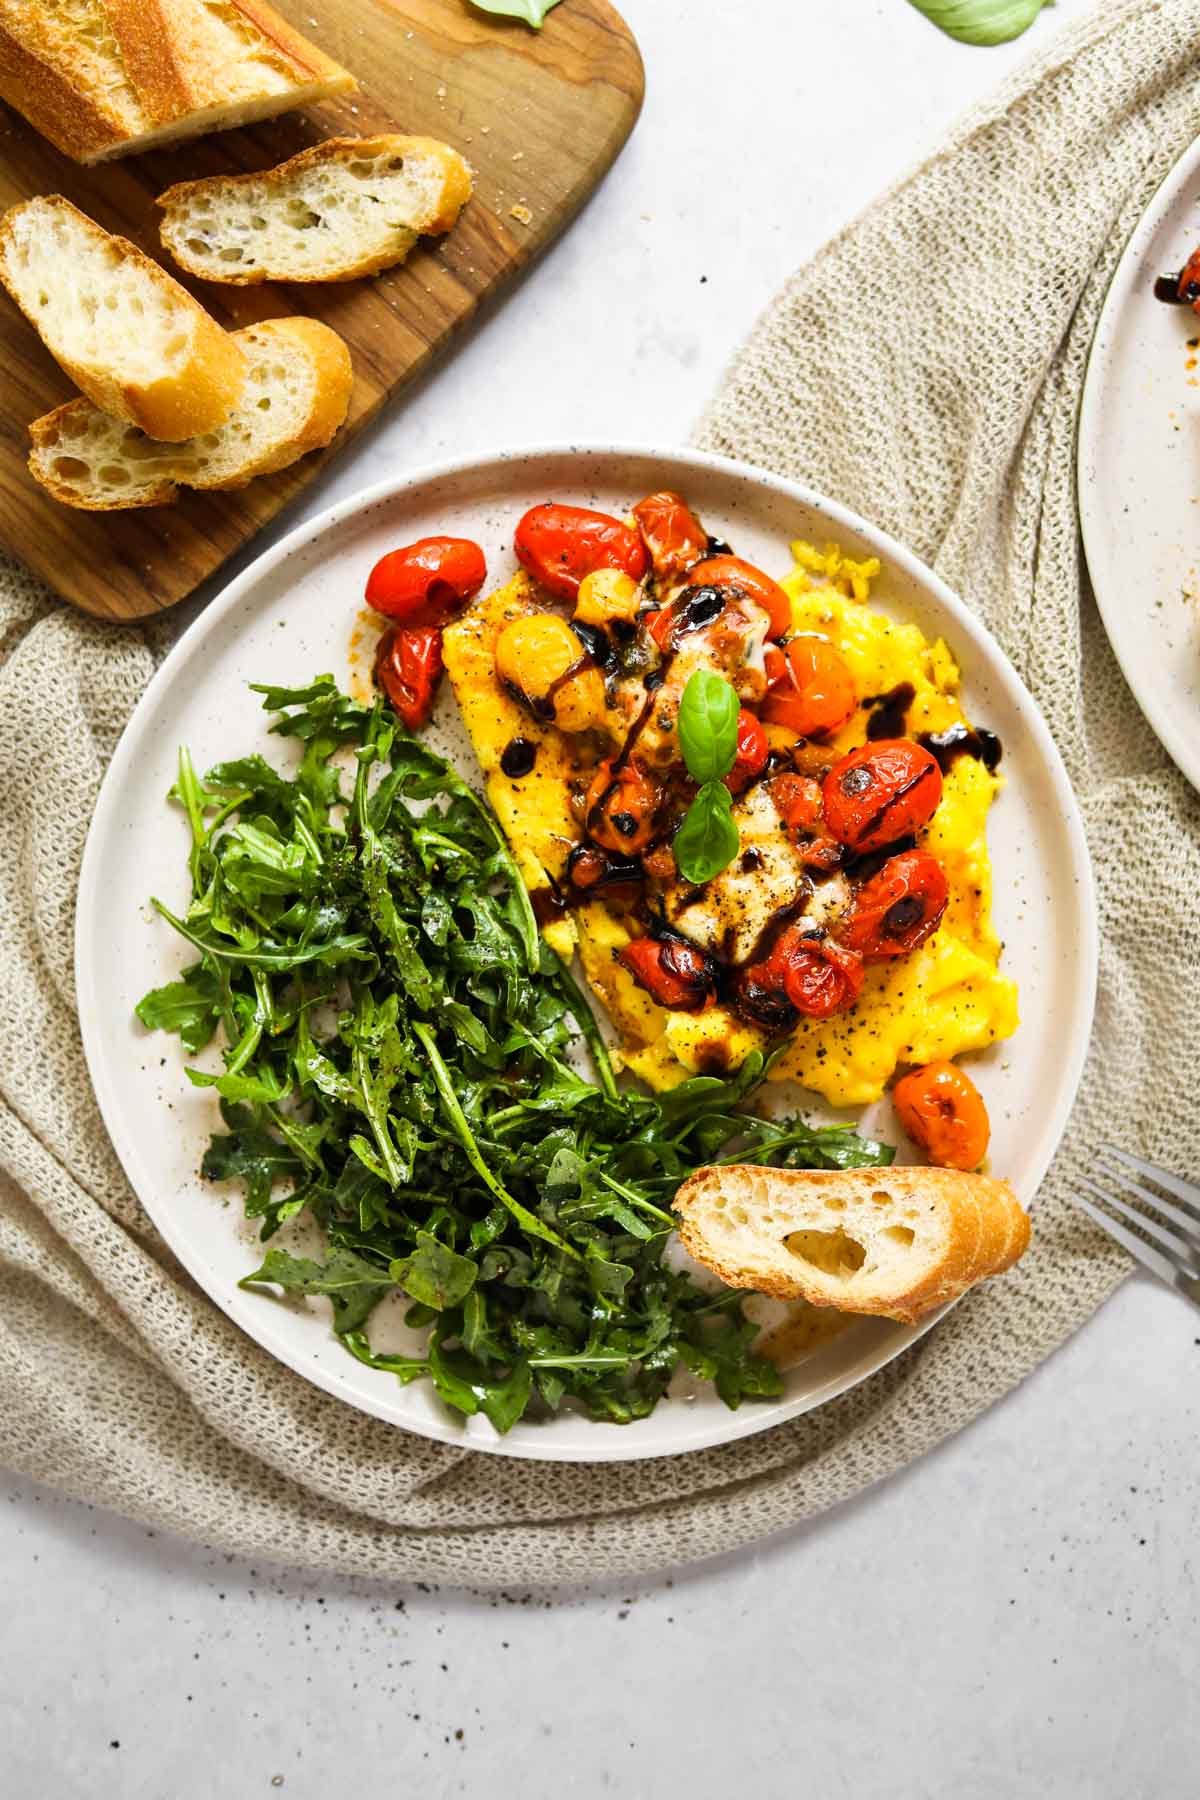 Soft-scrambled eggs with burrata, blistered tomatoes, arugula and a toasted baguette